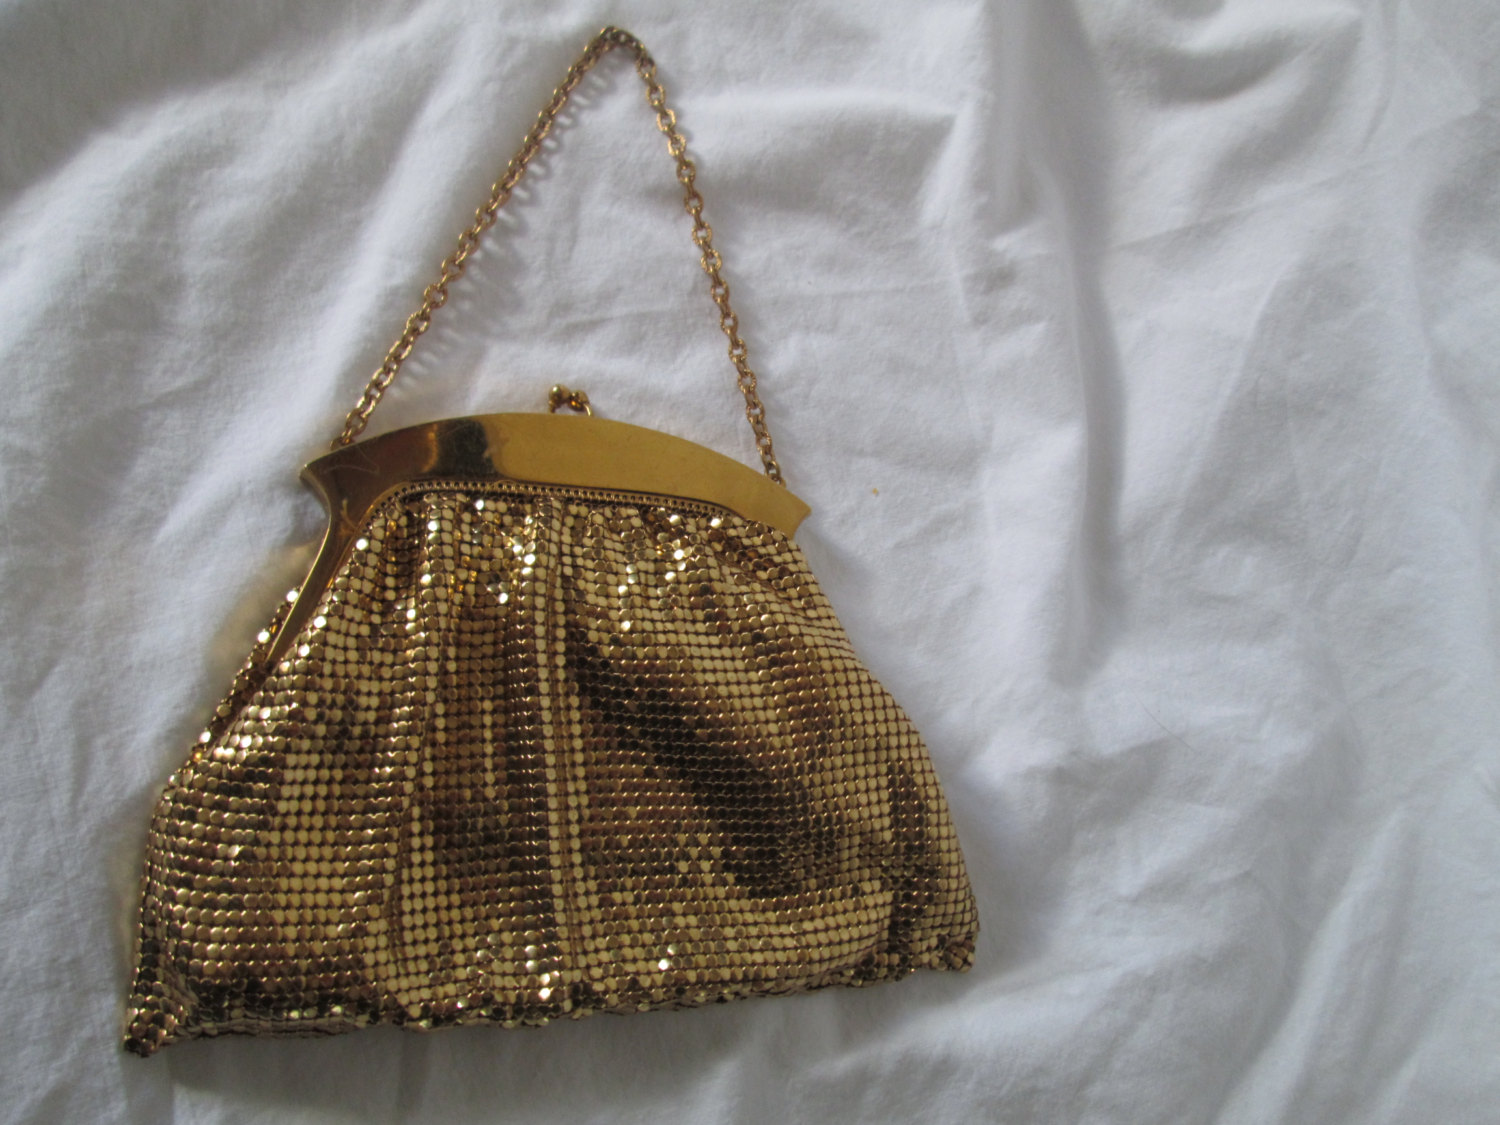 Gold Chain Mail Purse Evening Bag Handbag Vintage 50s Whiting & Davis Glam  Evening Mother of Pearl Trim